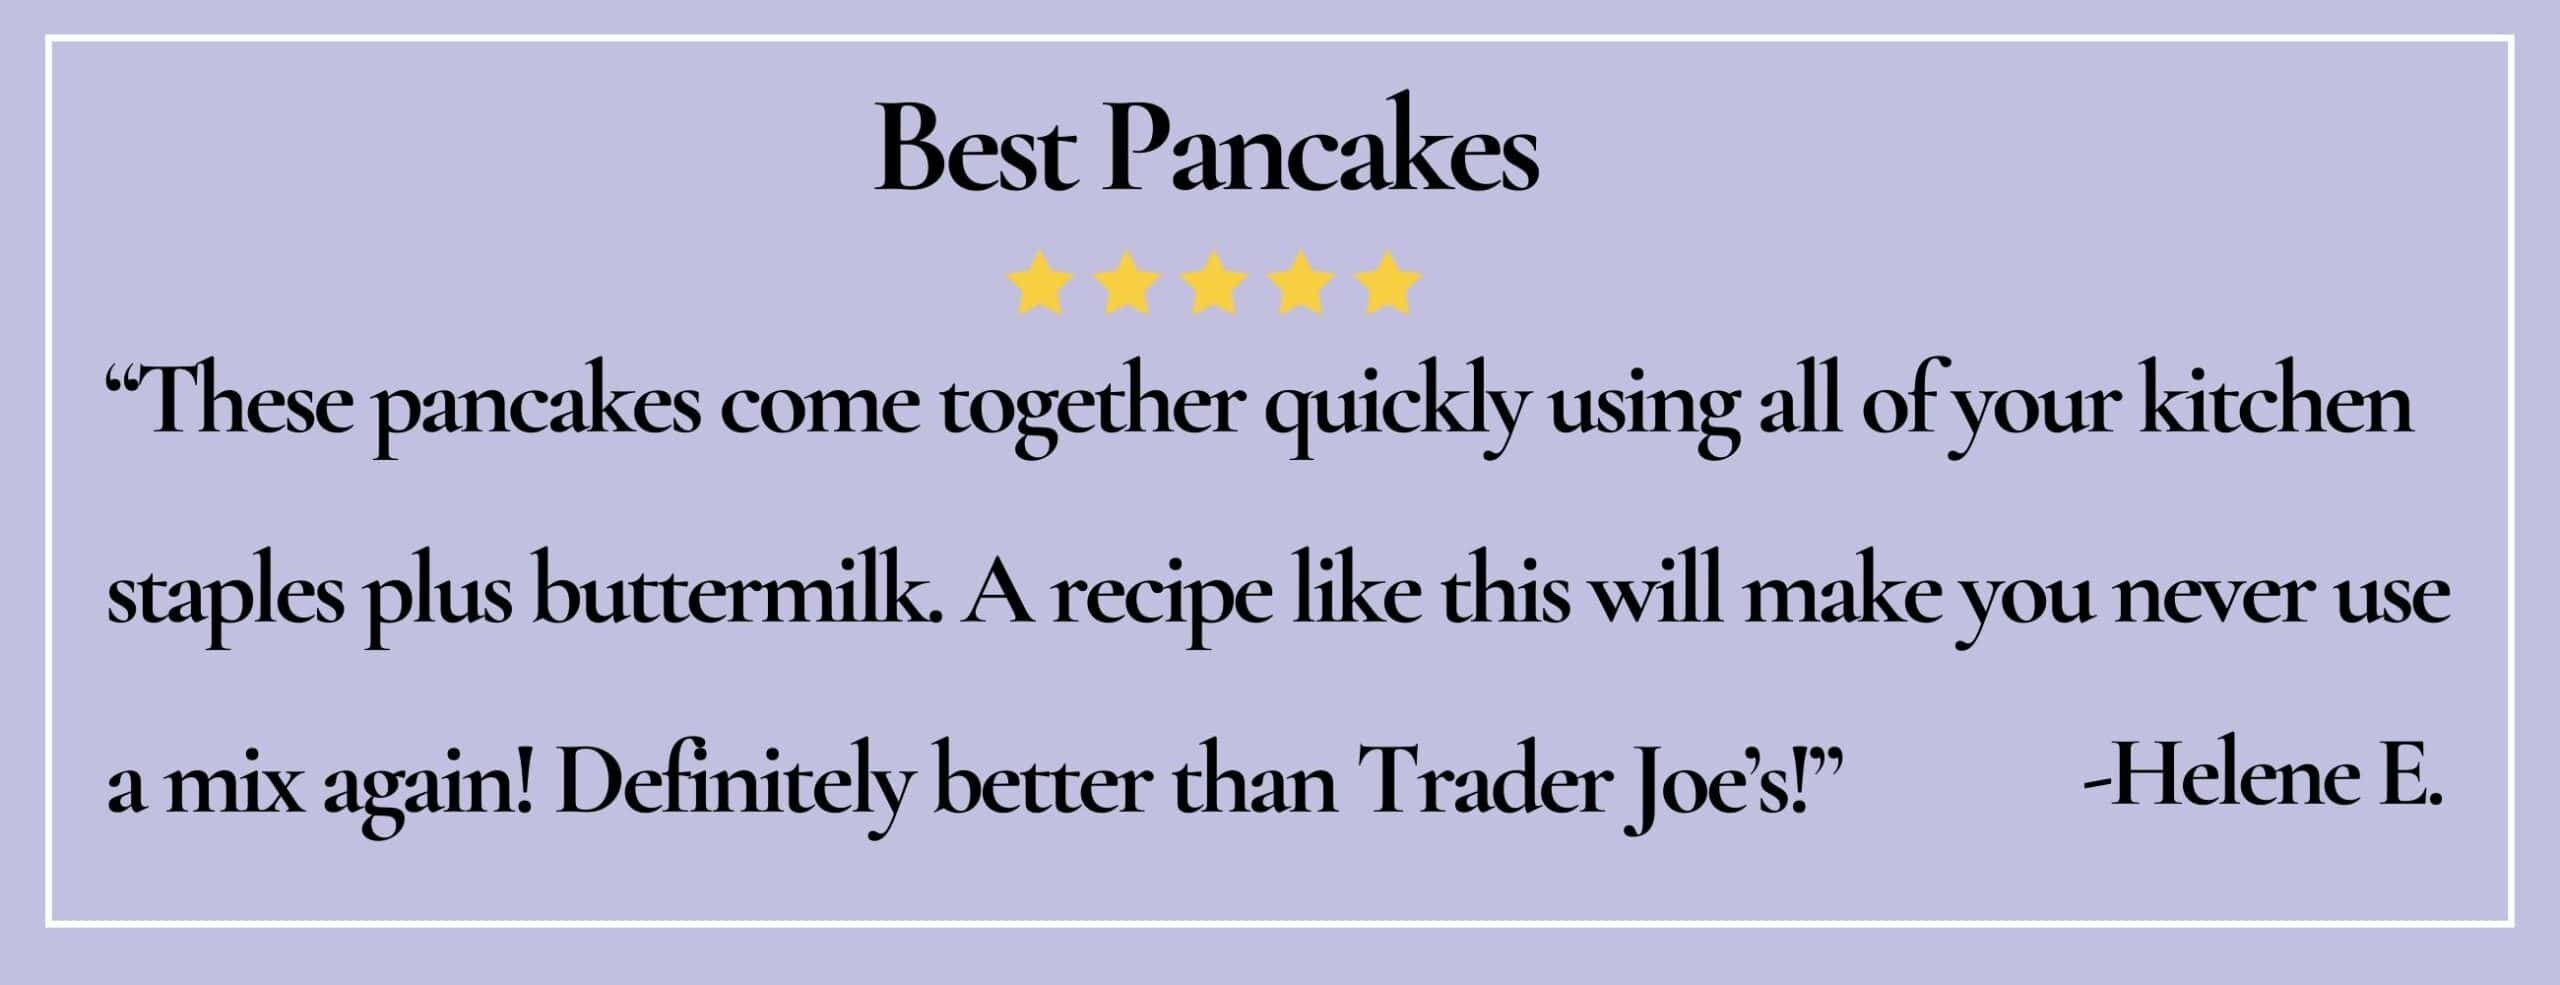 text box with paraphrase: A recipe like this will make you never use a mix again...better than Trader Joe’s! -Helene